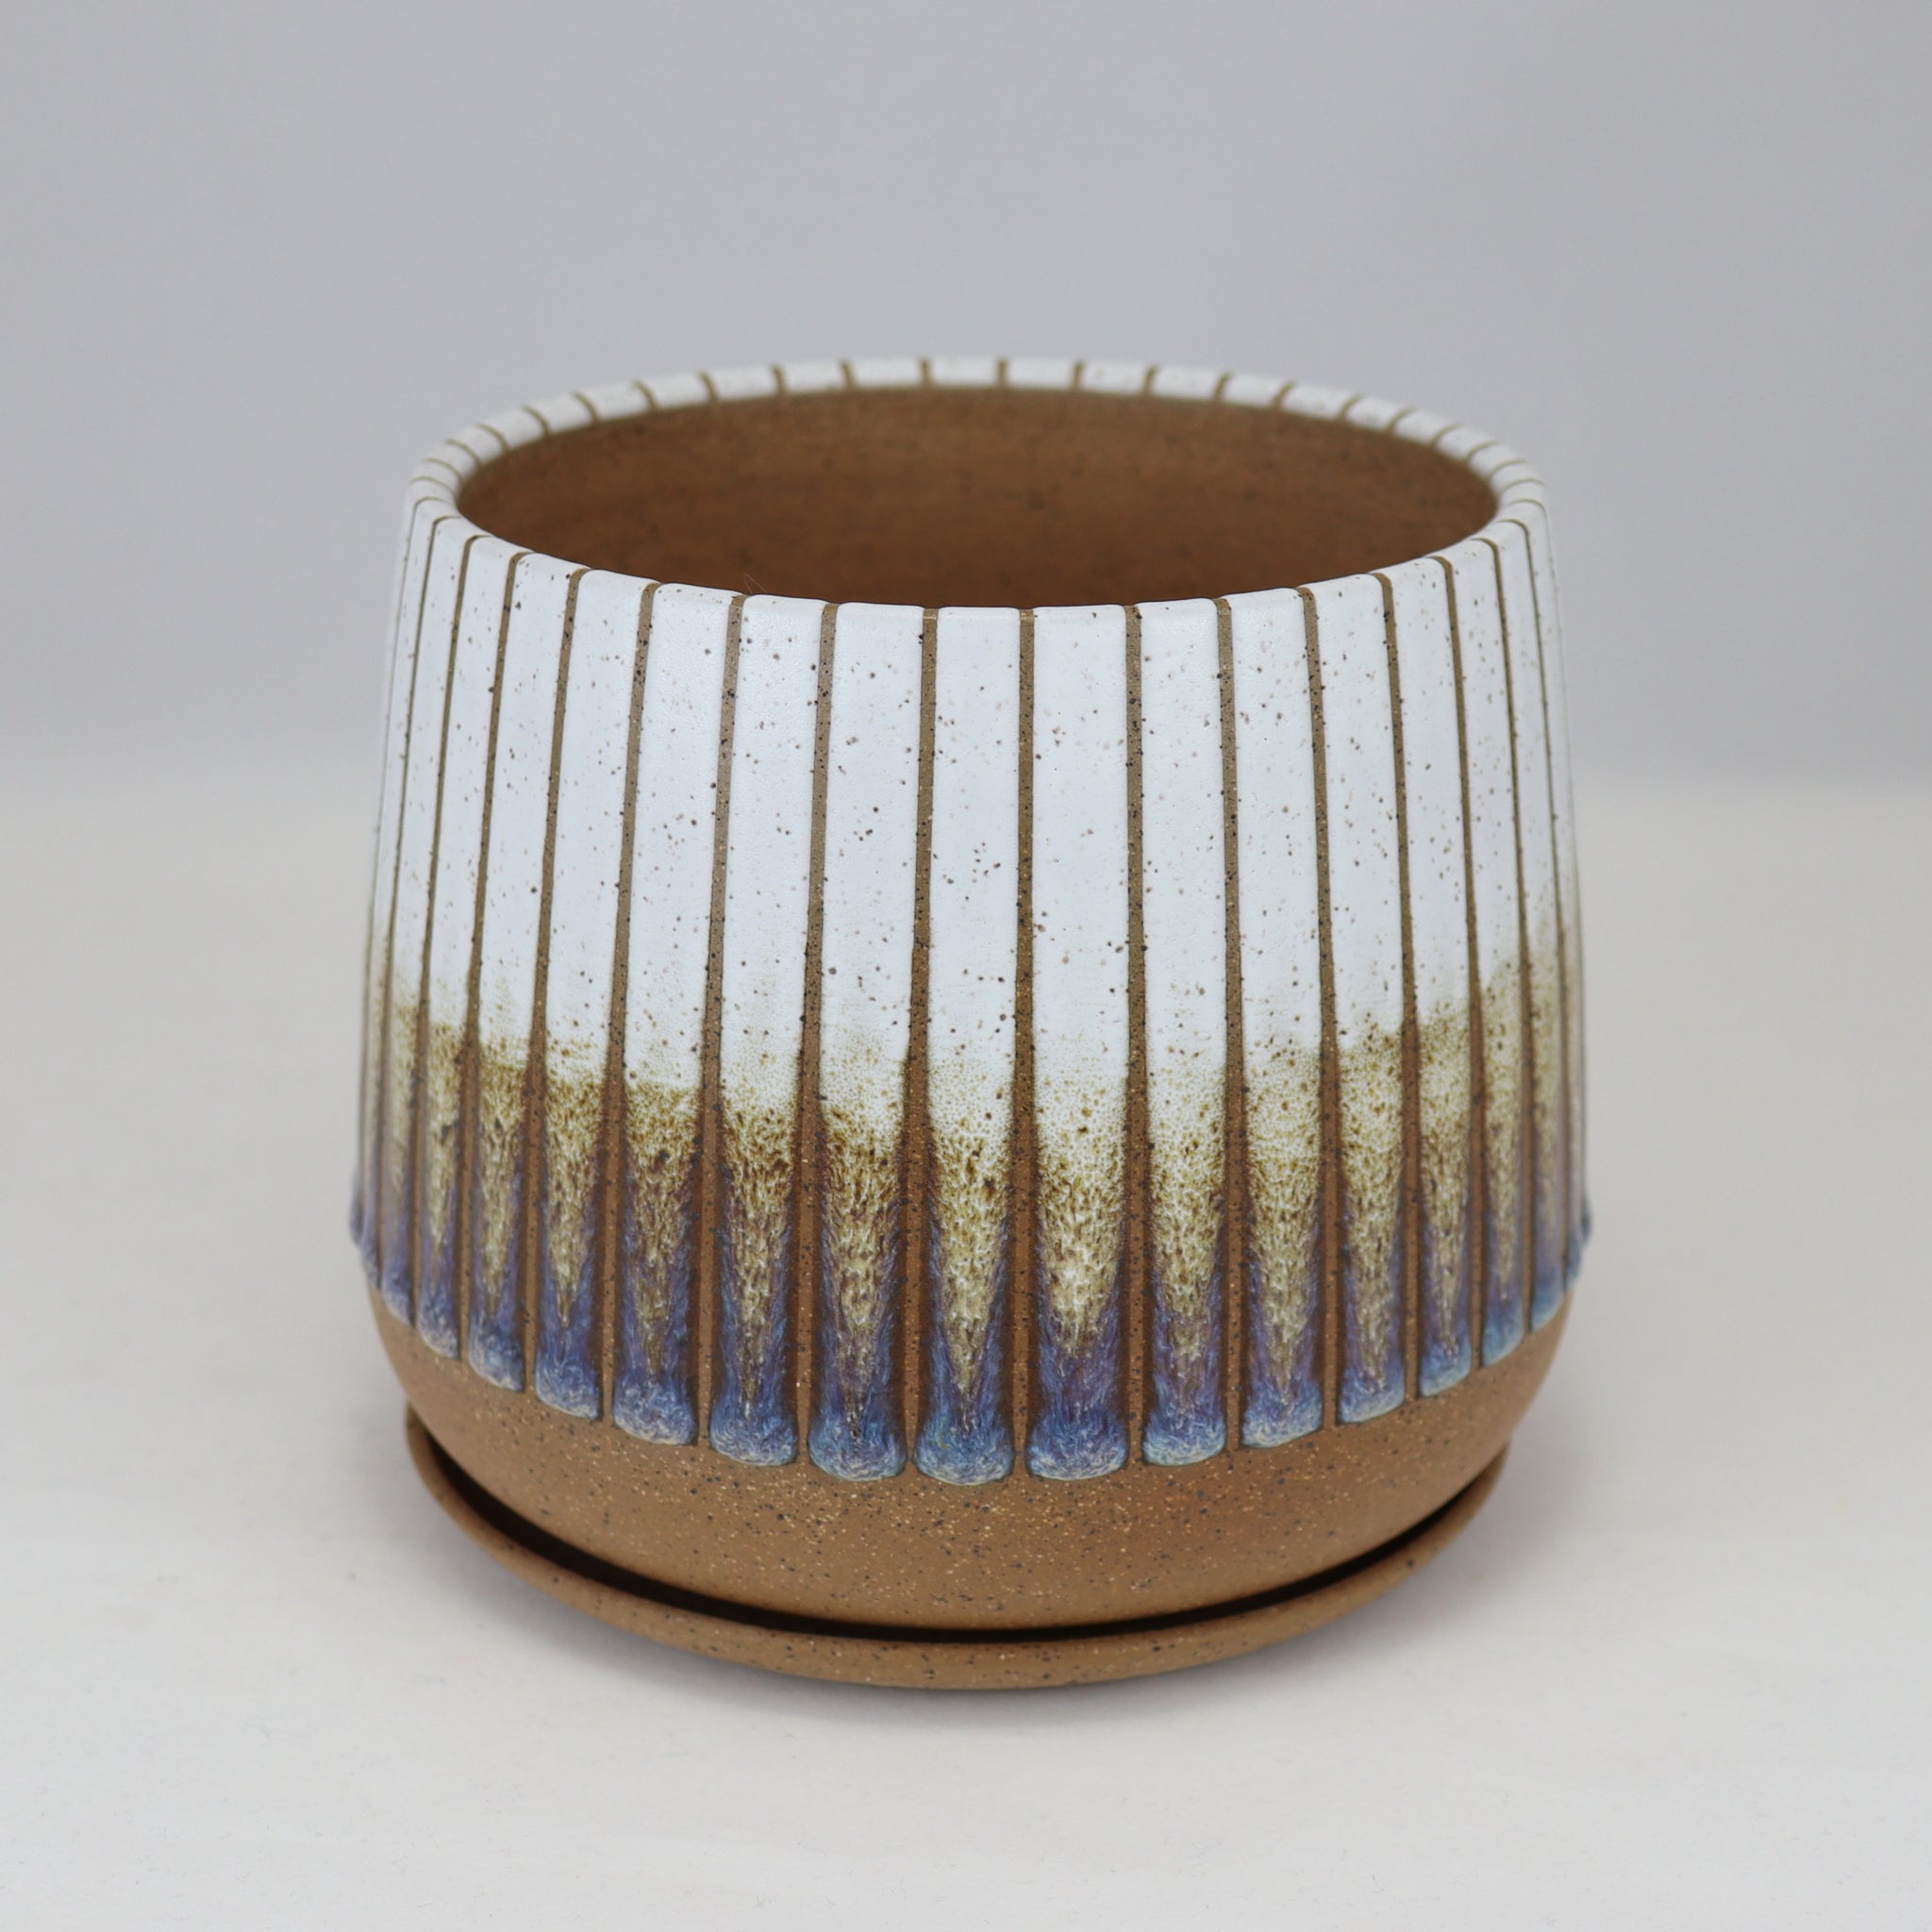 Oil Slick Planter on Speckled Clay (5 in / 13 cm) #5